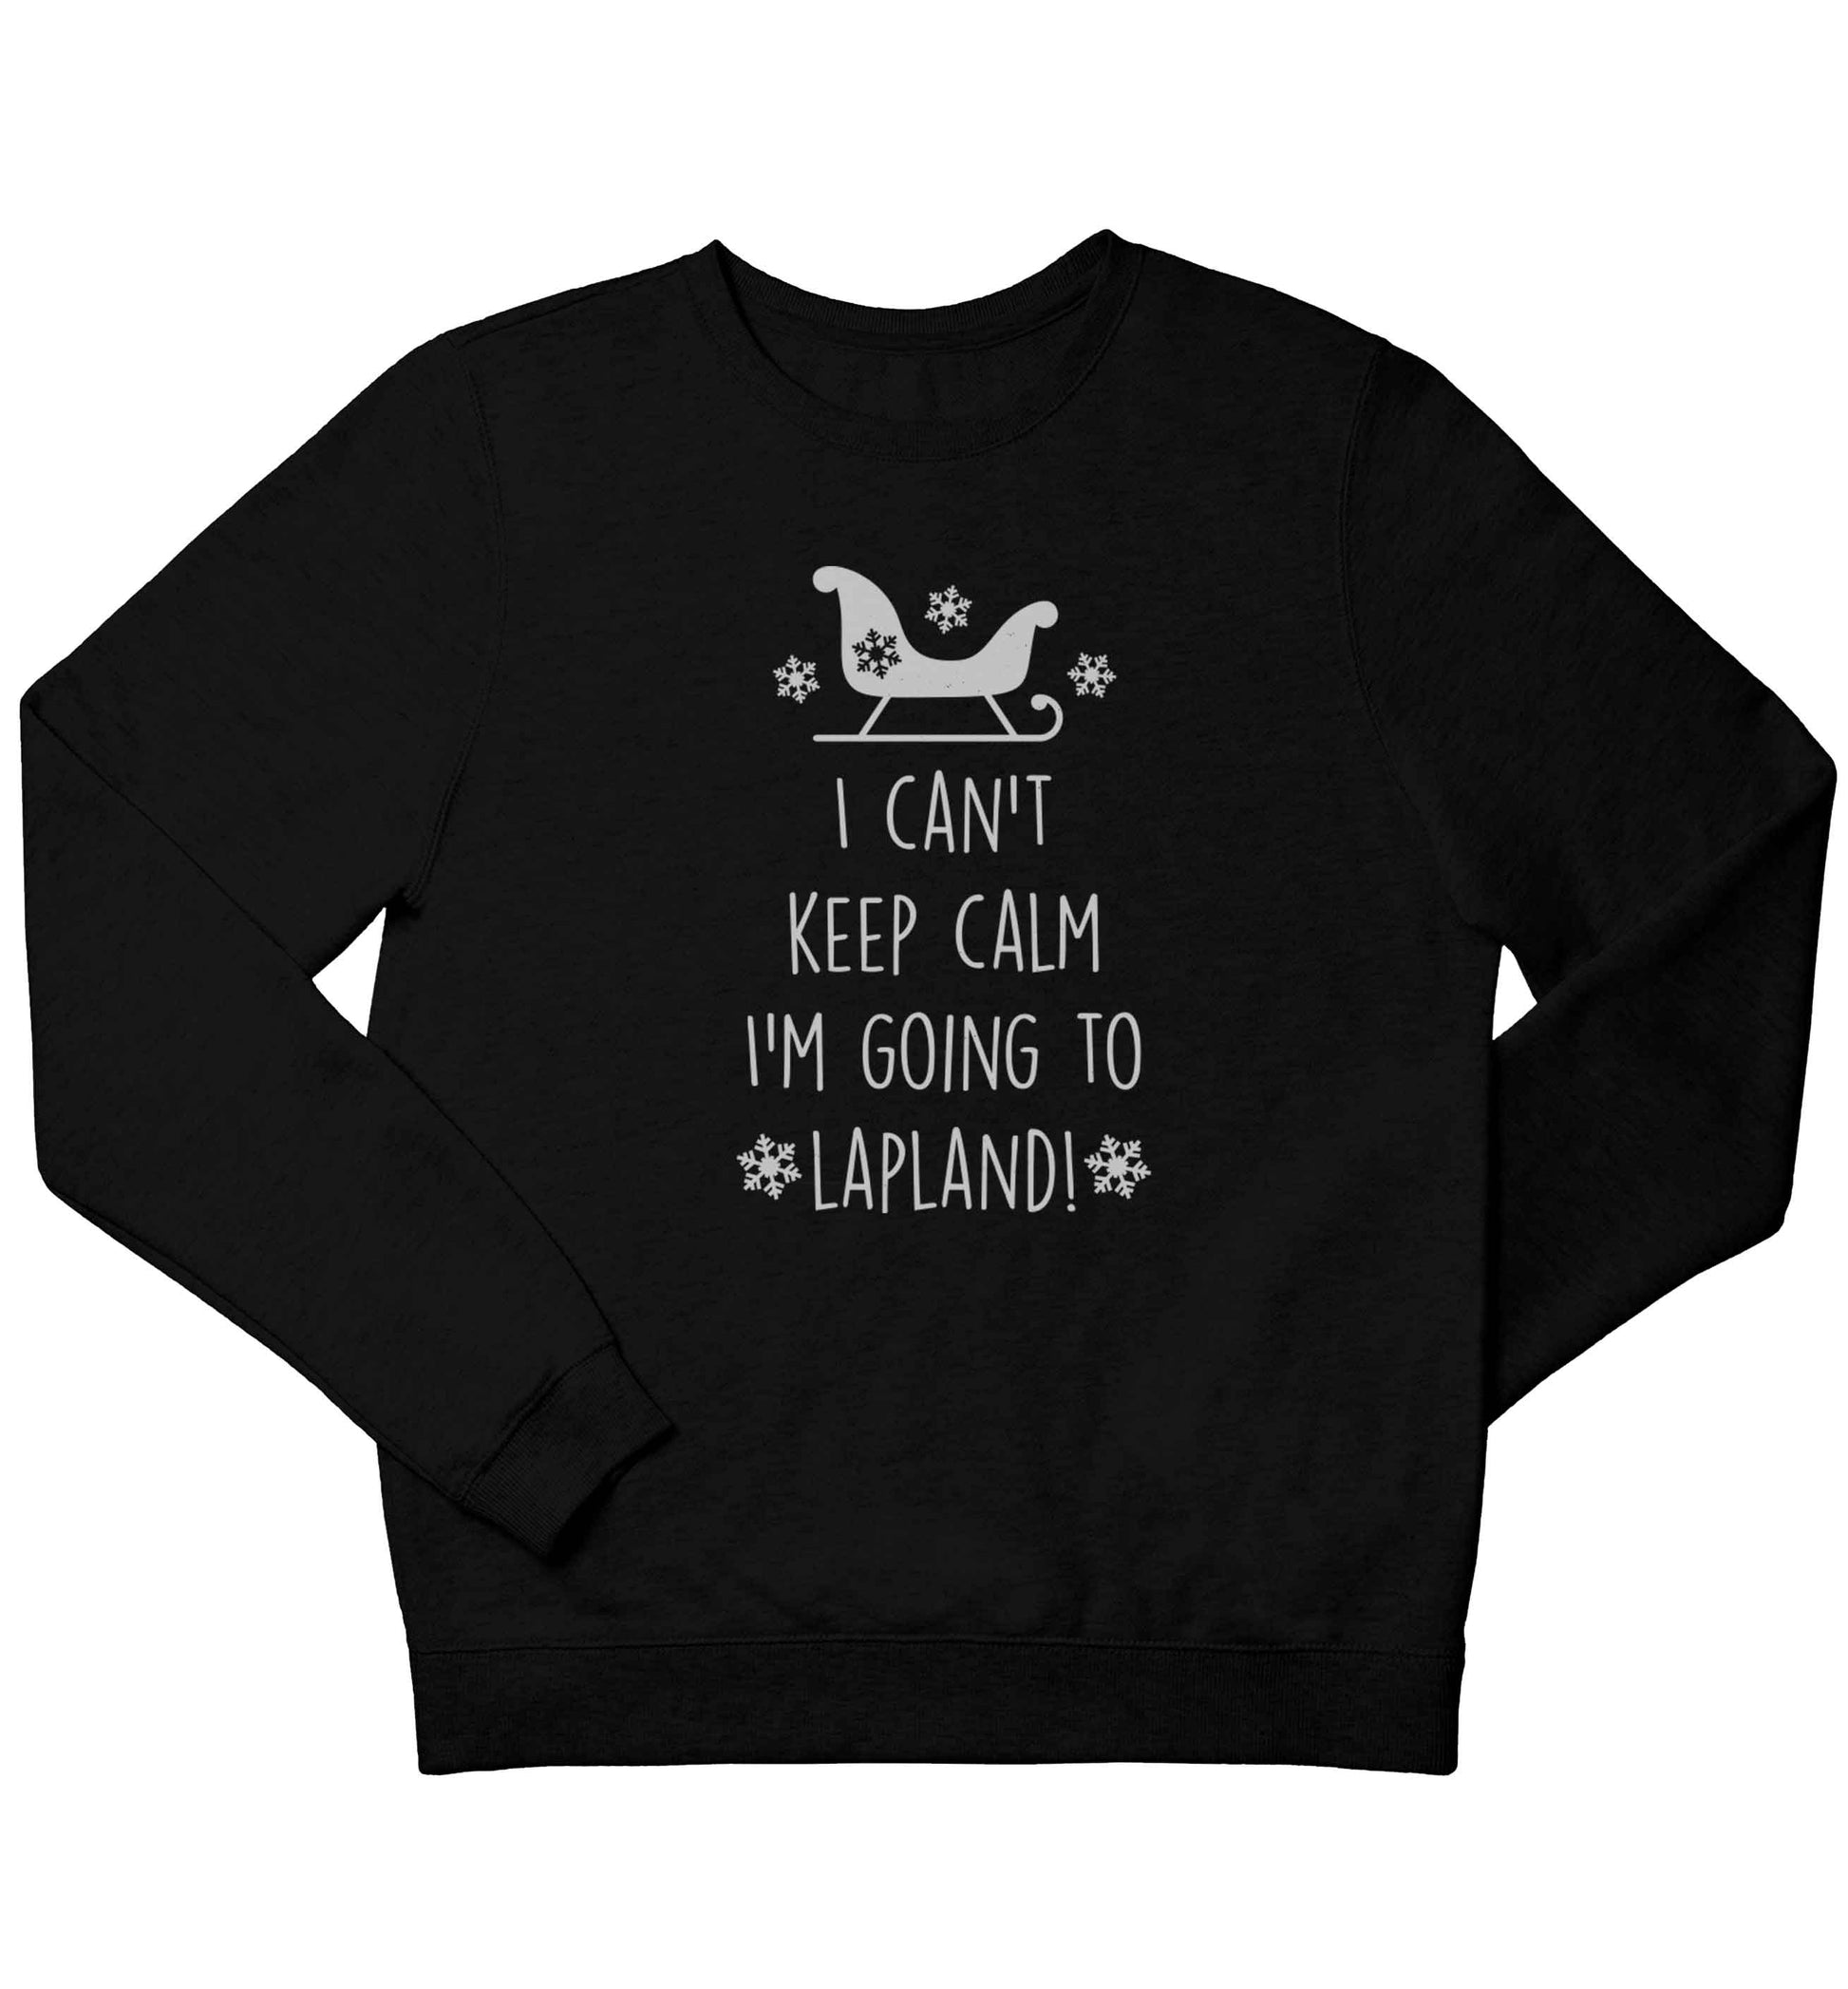 I can't keep calm I'm going to Lapland children's black sweater 12-13 Years